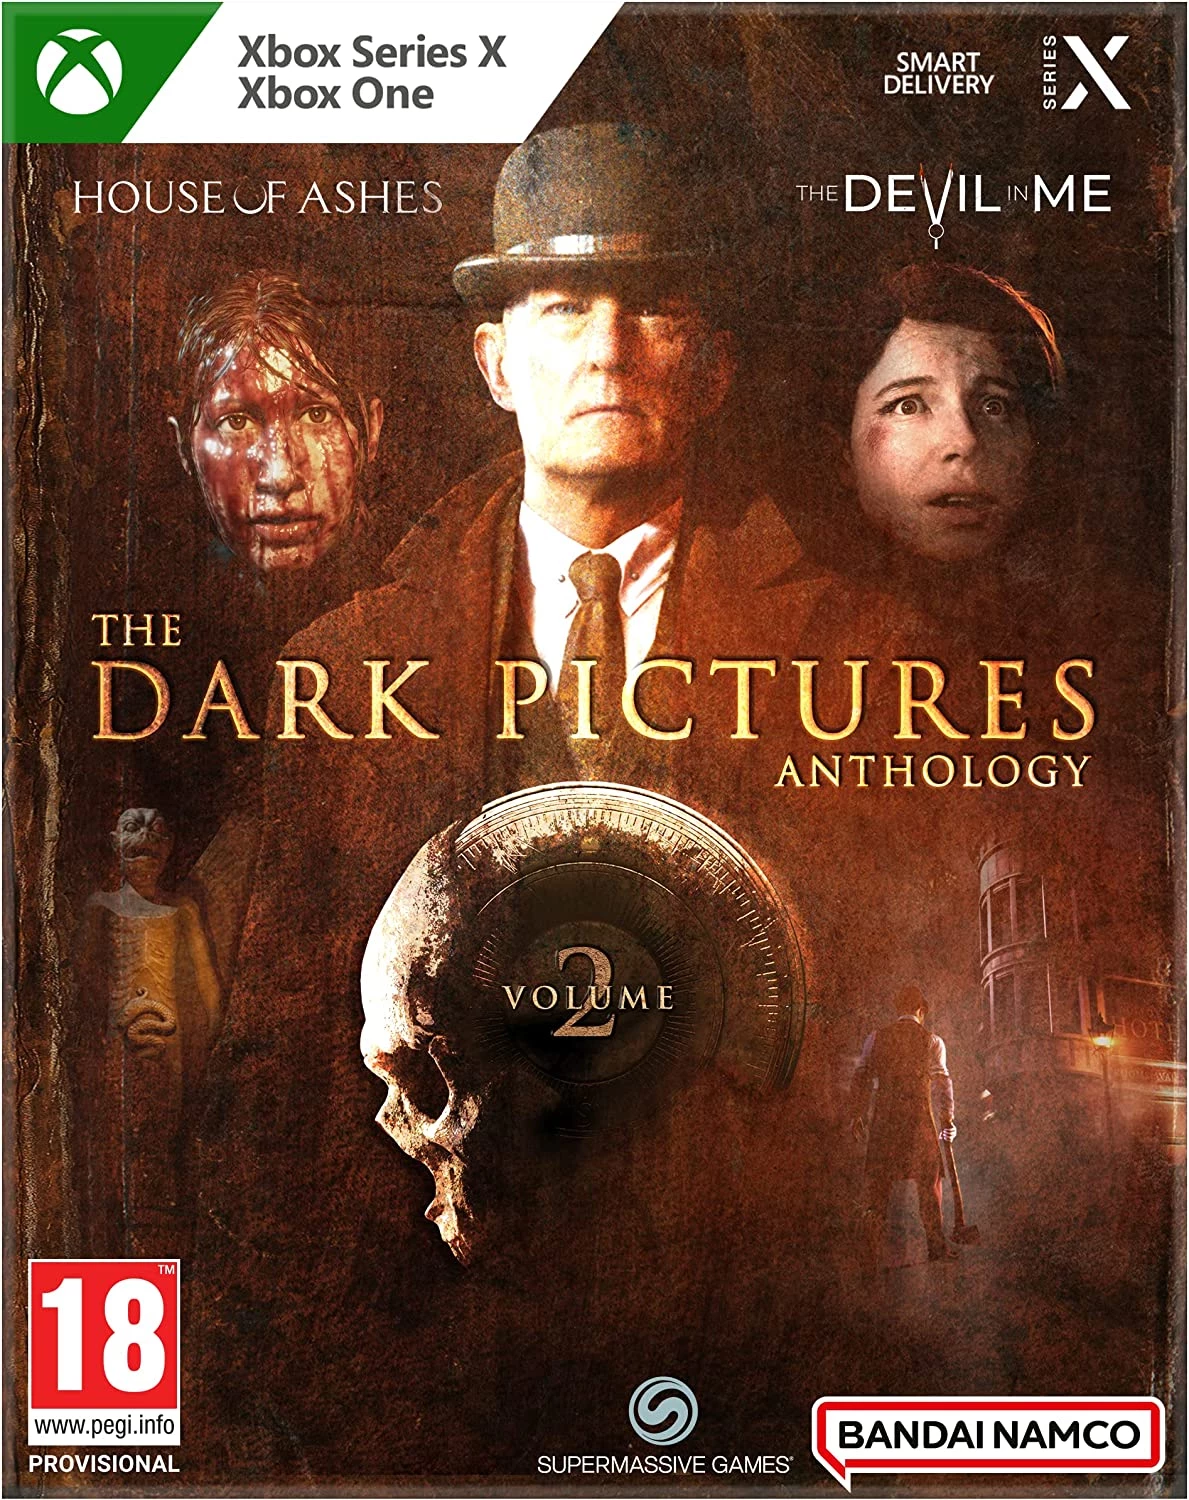 The Dark Pictures - Volume 2 (House of Ashes + The Devil in Me)